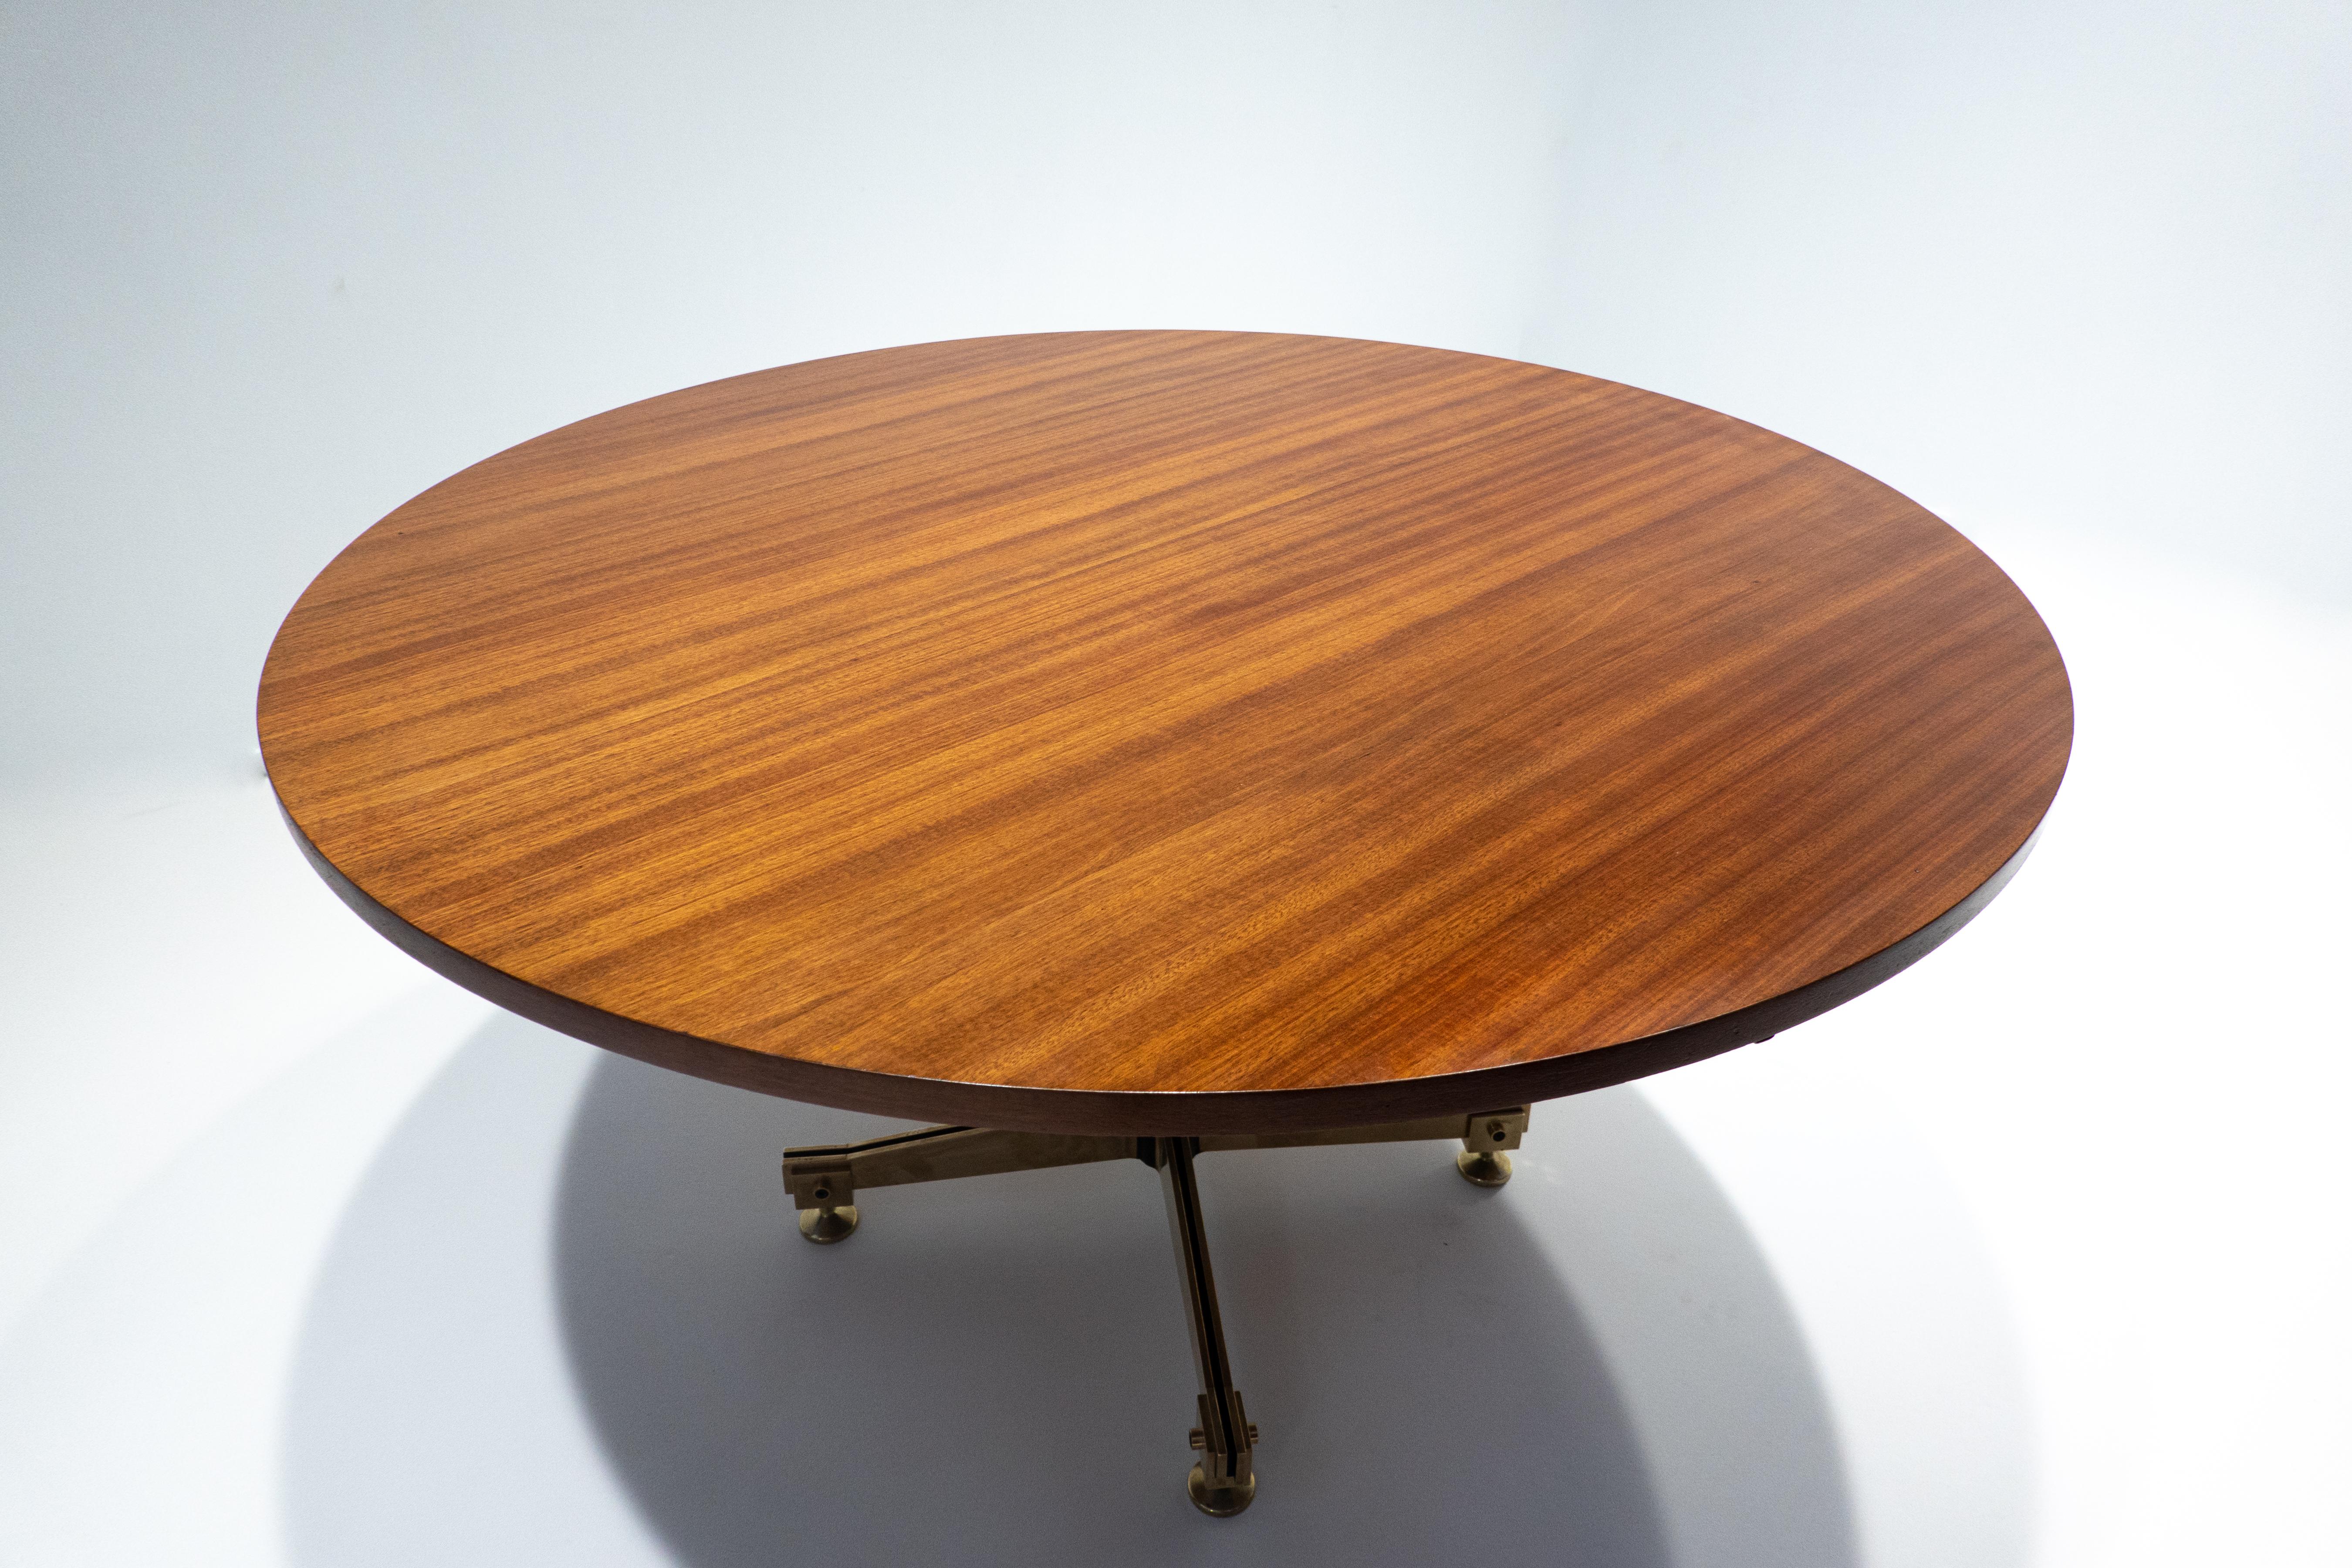 Wood and Ceramic Extendable Dining Table Melchiorre Bega & Pietro Melandri In Good Condition For Sale In Brussels, BE